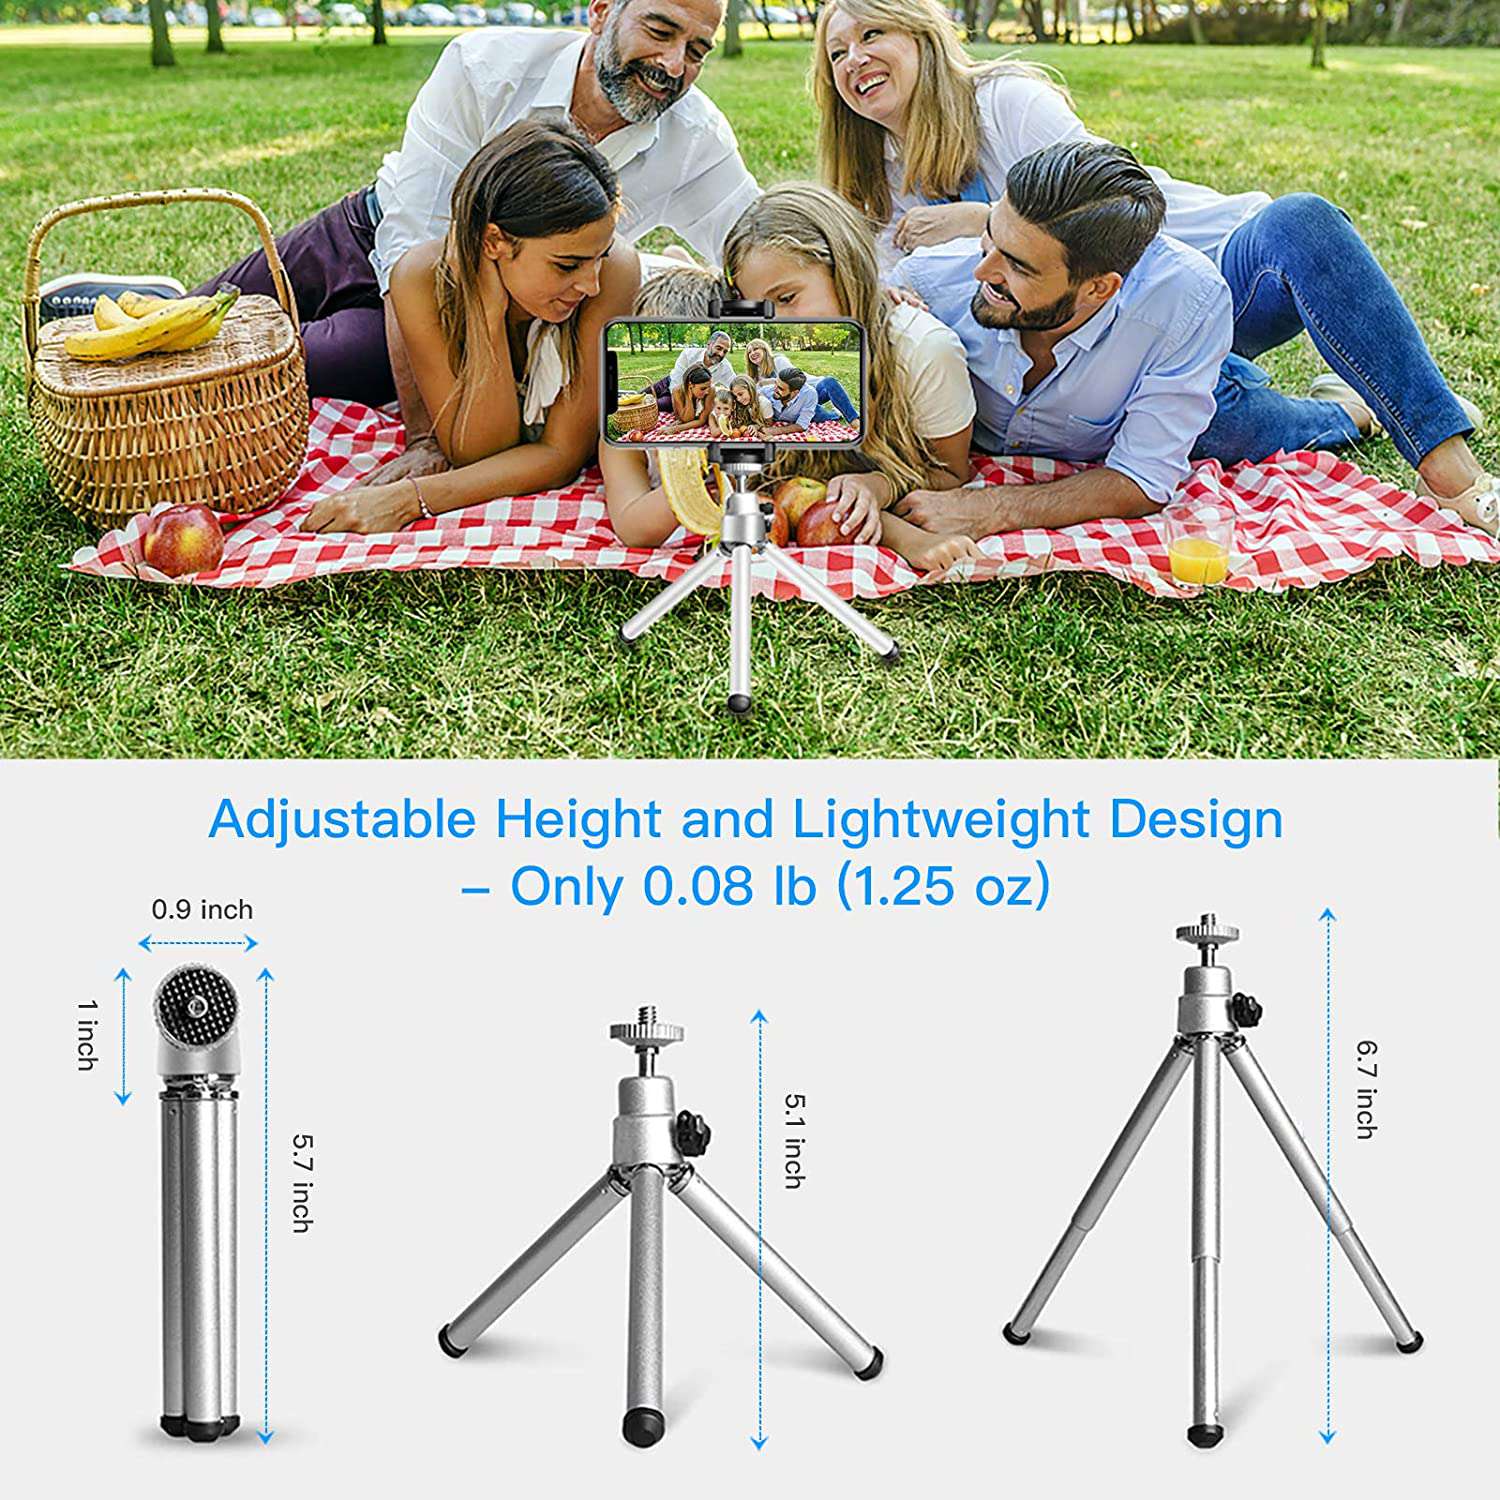 Family using lightweight tripod for phone photography, adjustable from 5.1'' to 6.7'', weight 0.08lb